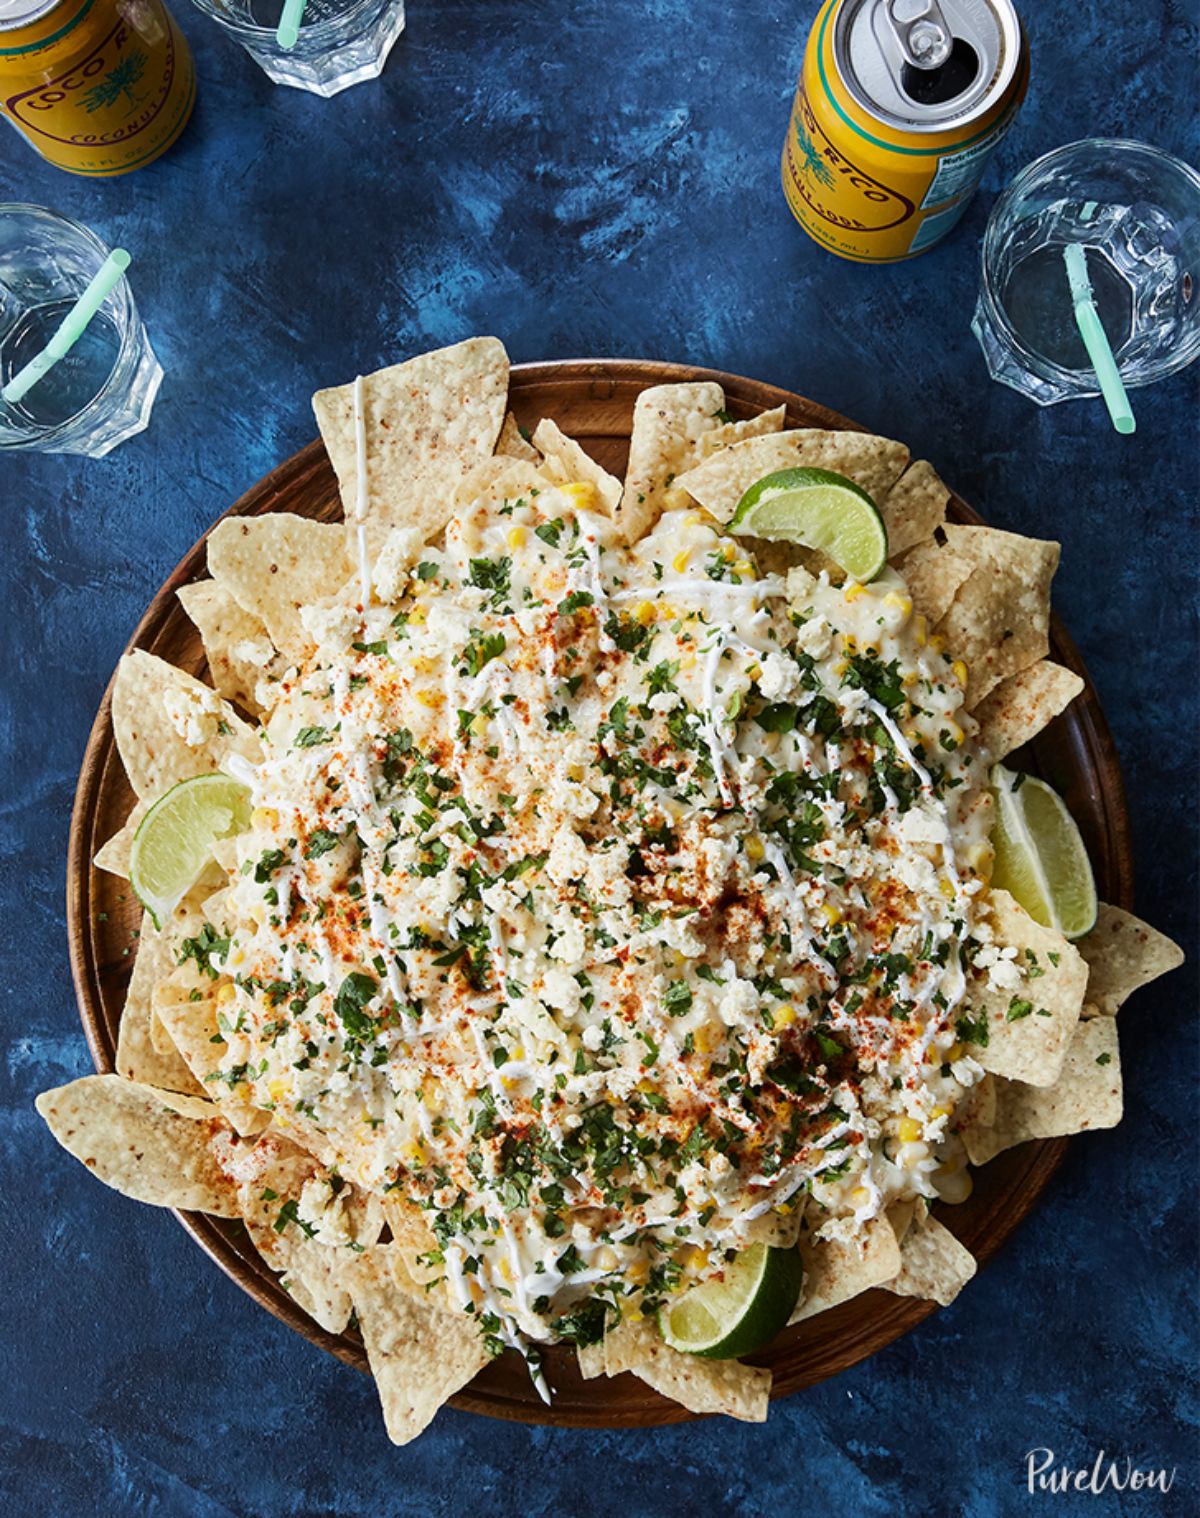 Flavorful mexican street corn dip with chips in a wooden bowl.